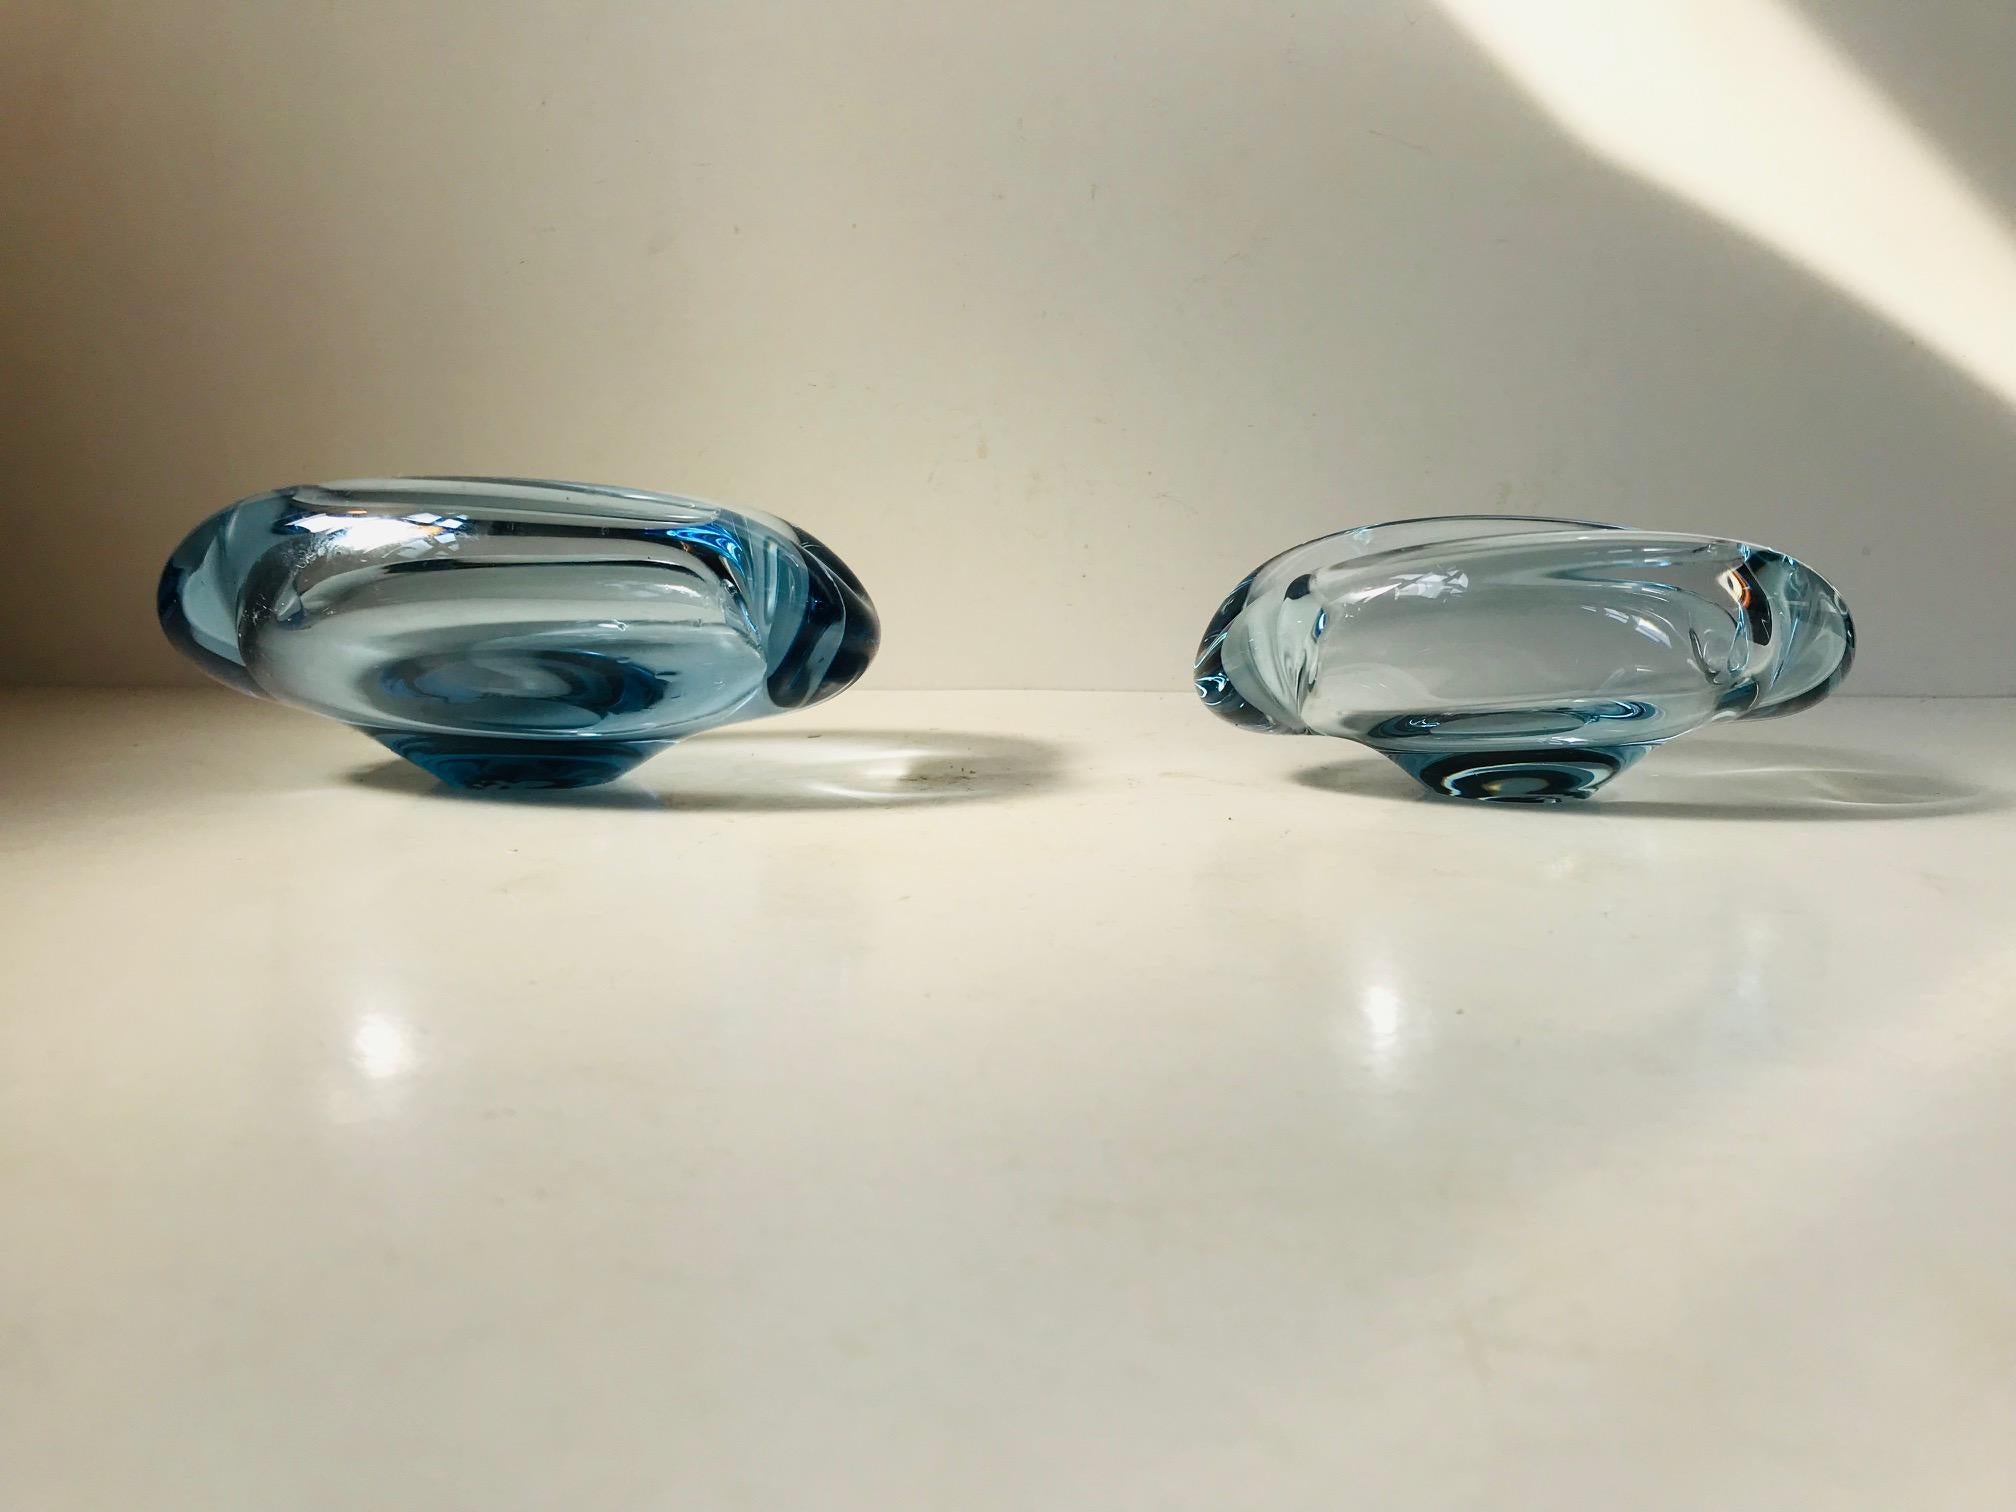 Light blue partially collapsed glass bowls or ashtrays designed by Per Lütken in 1958 and manufactured by Holmegaard in Denmark until 1970. Both pieces are signed and numbered by Per Lütken to the base. Both are in fine intact condition only with